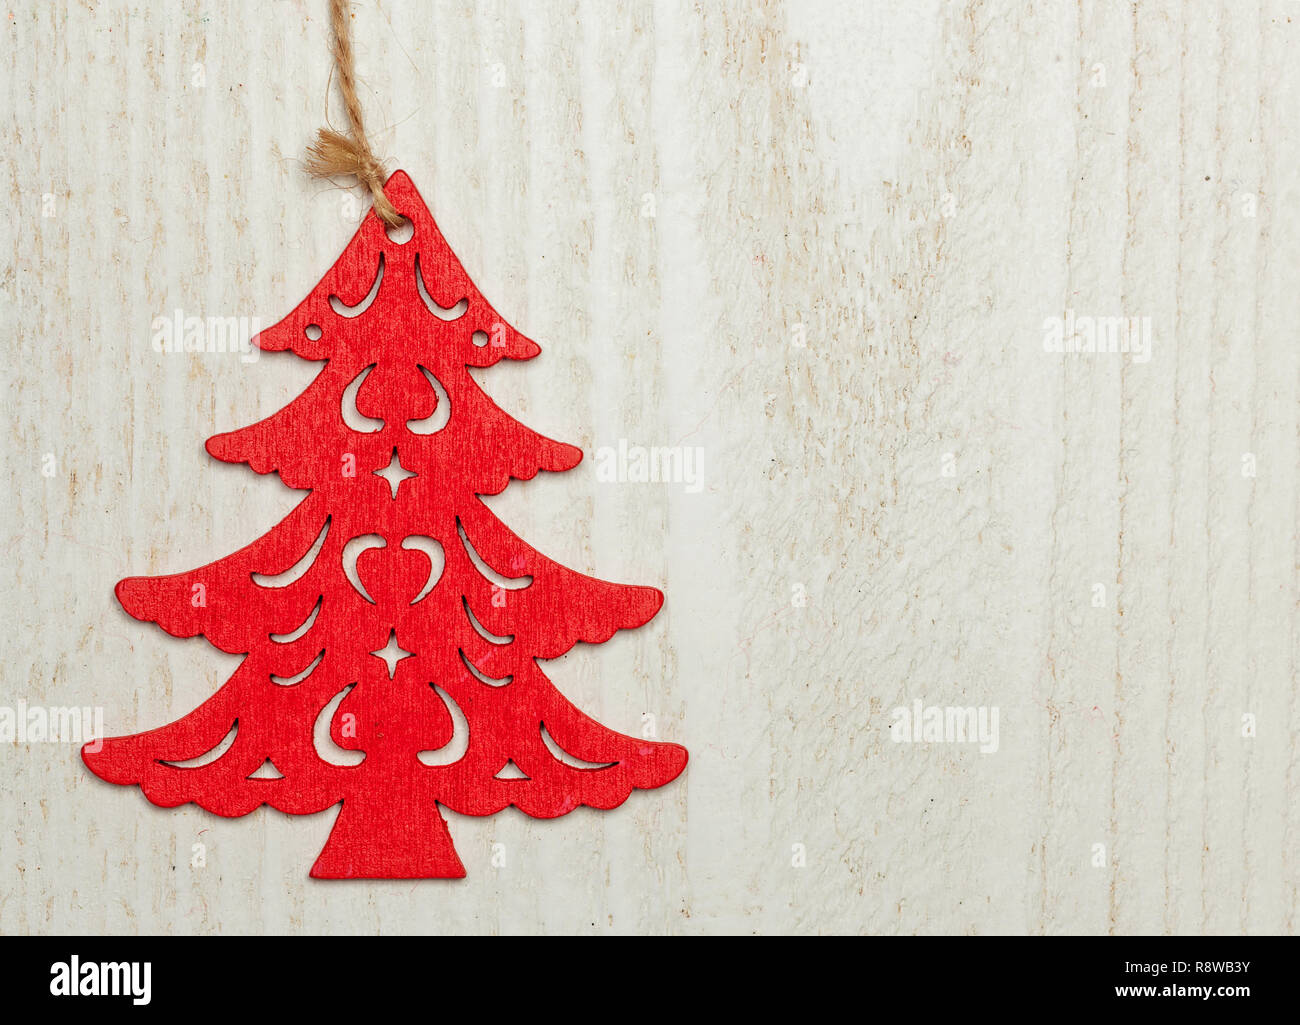 Red wooden Christmas sapling on white wood background. Decentralized object with space for text. Stock Photo